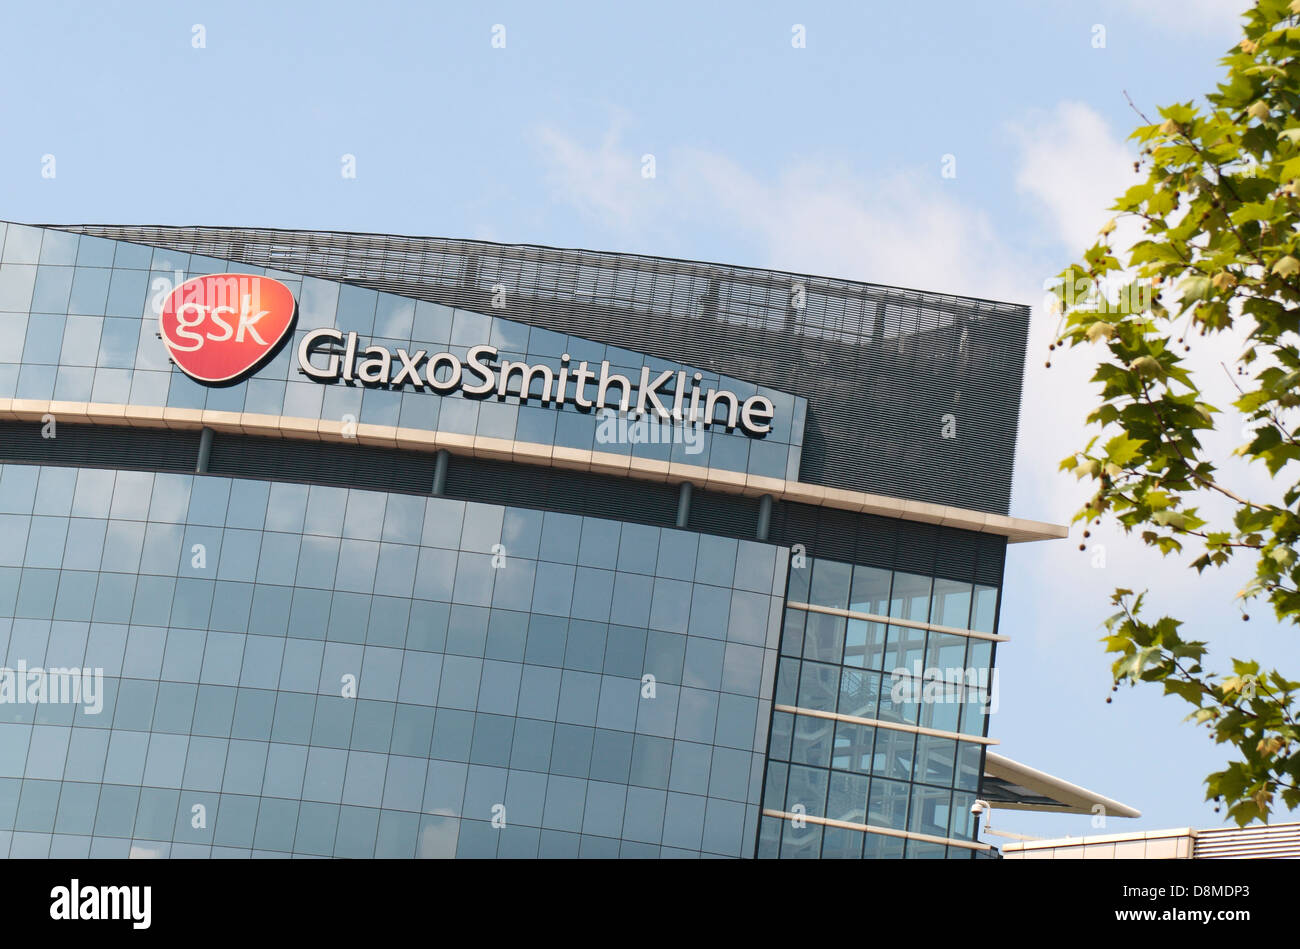 The front elevation of the GlaxoSmithKline head office building in Brentford, Middx, UK. Stock Photo